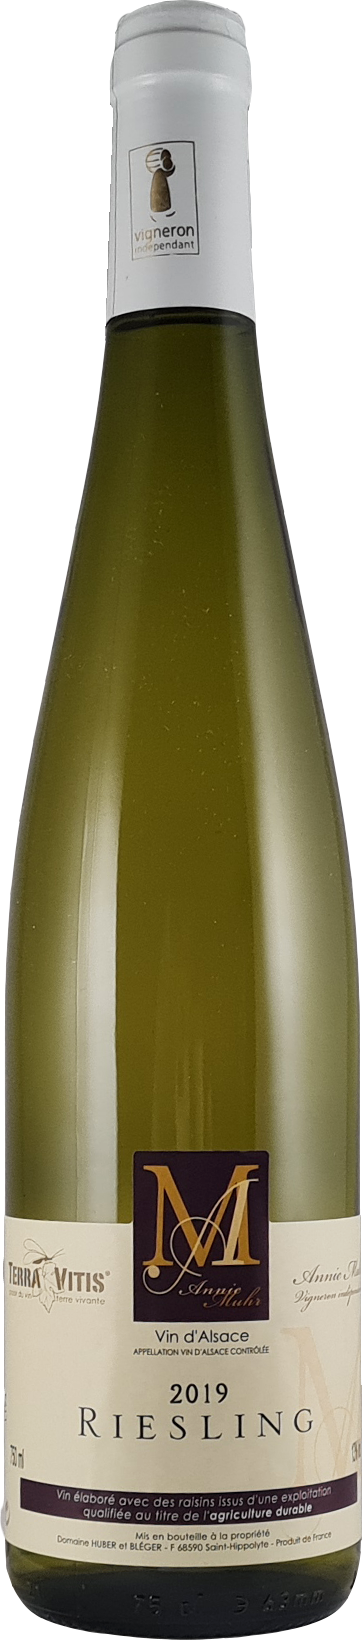 riesling vin blanc alsace